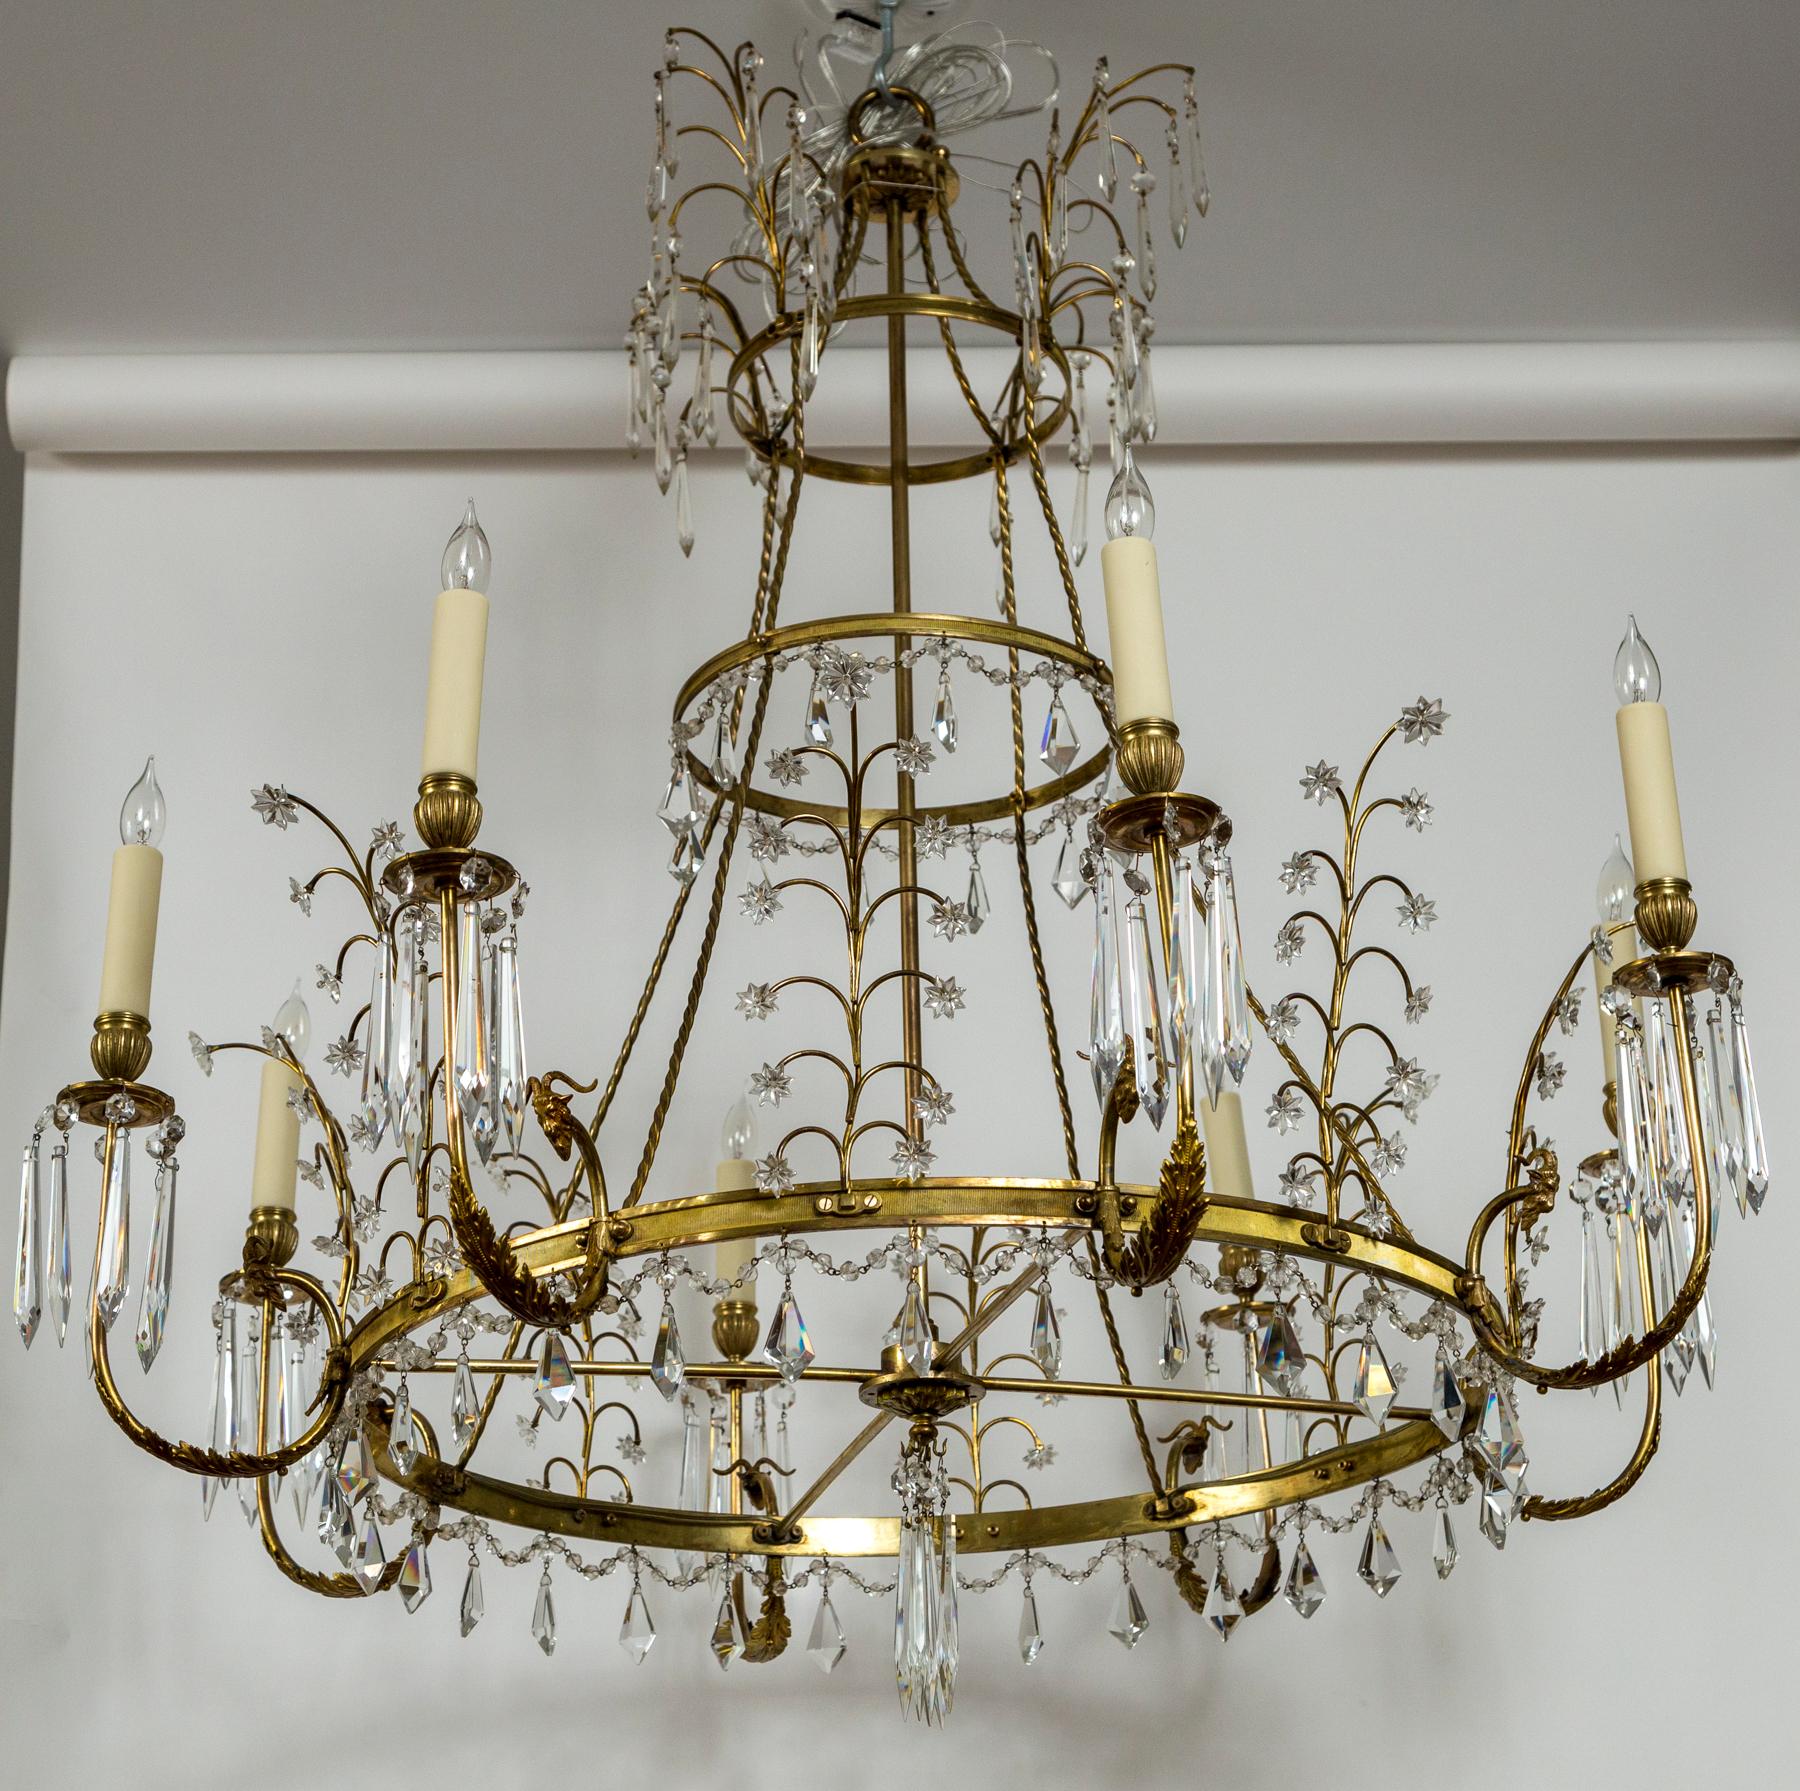 Early 20th Century Baltic Russian Neoclassical Brass and Crystal Chandelier For Sale 8